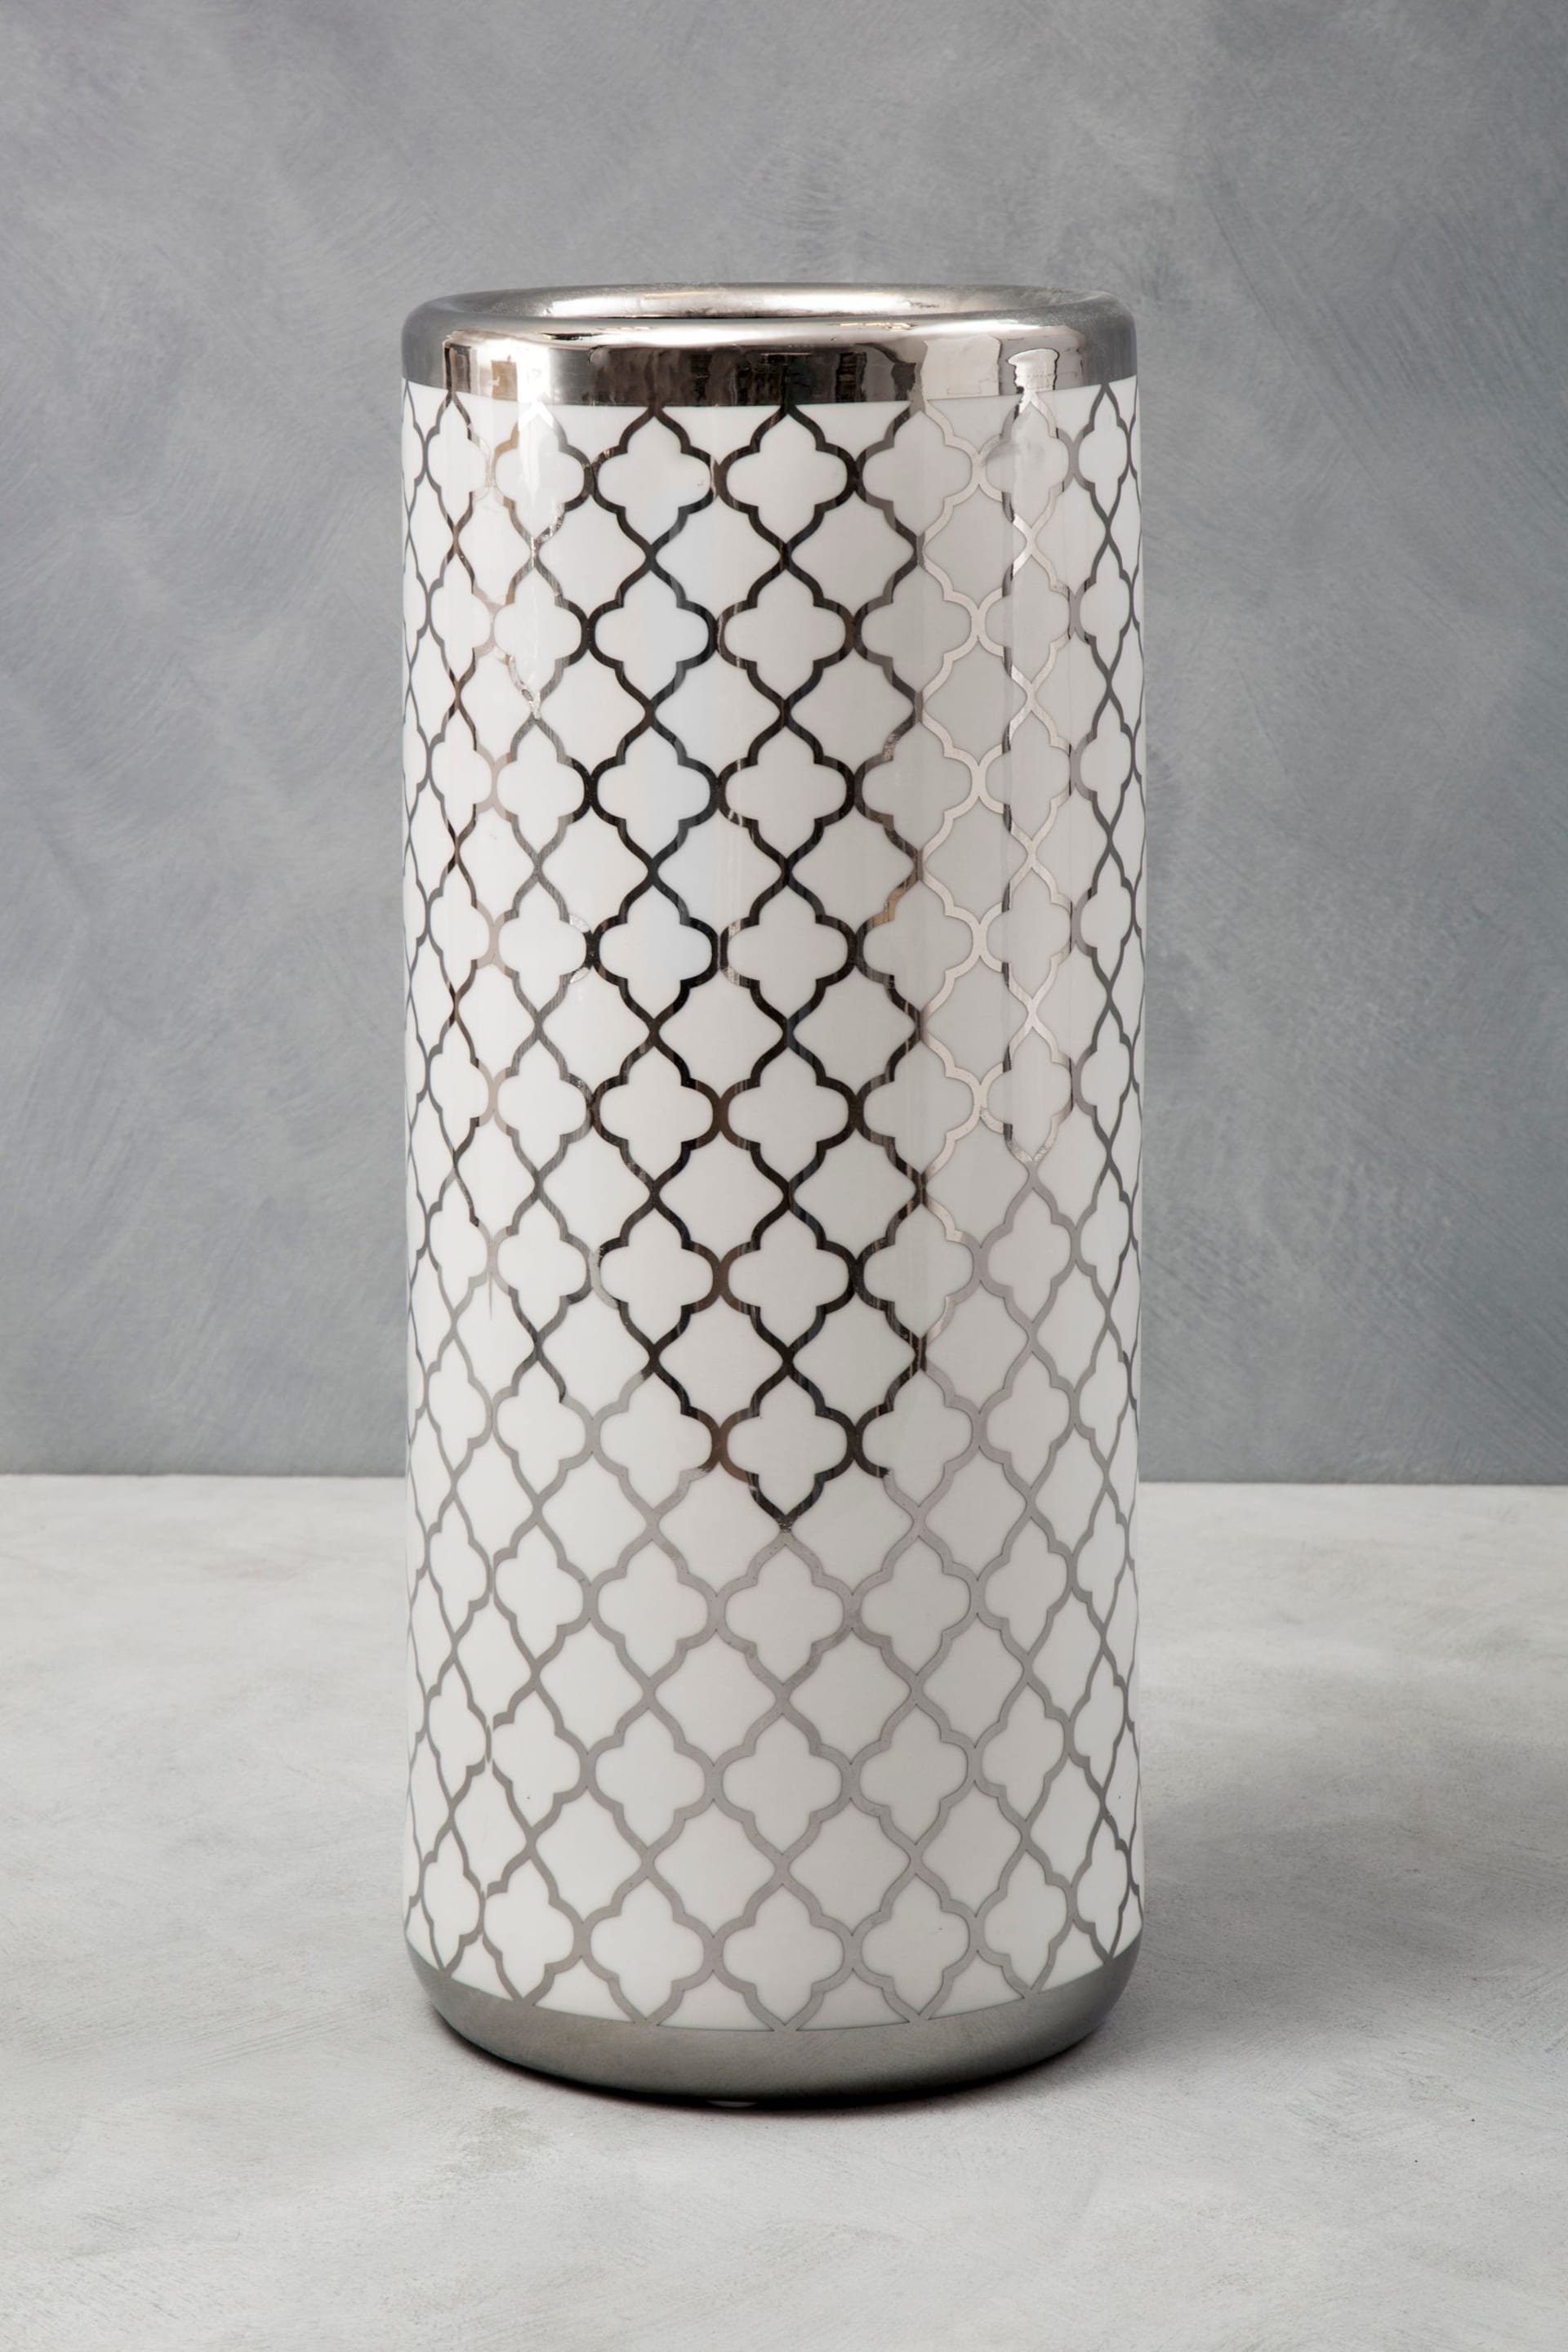 Fifty Five South White/Silver Renne Ceramic Umbrella Stand - Image 2 of 4